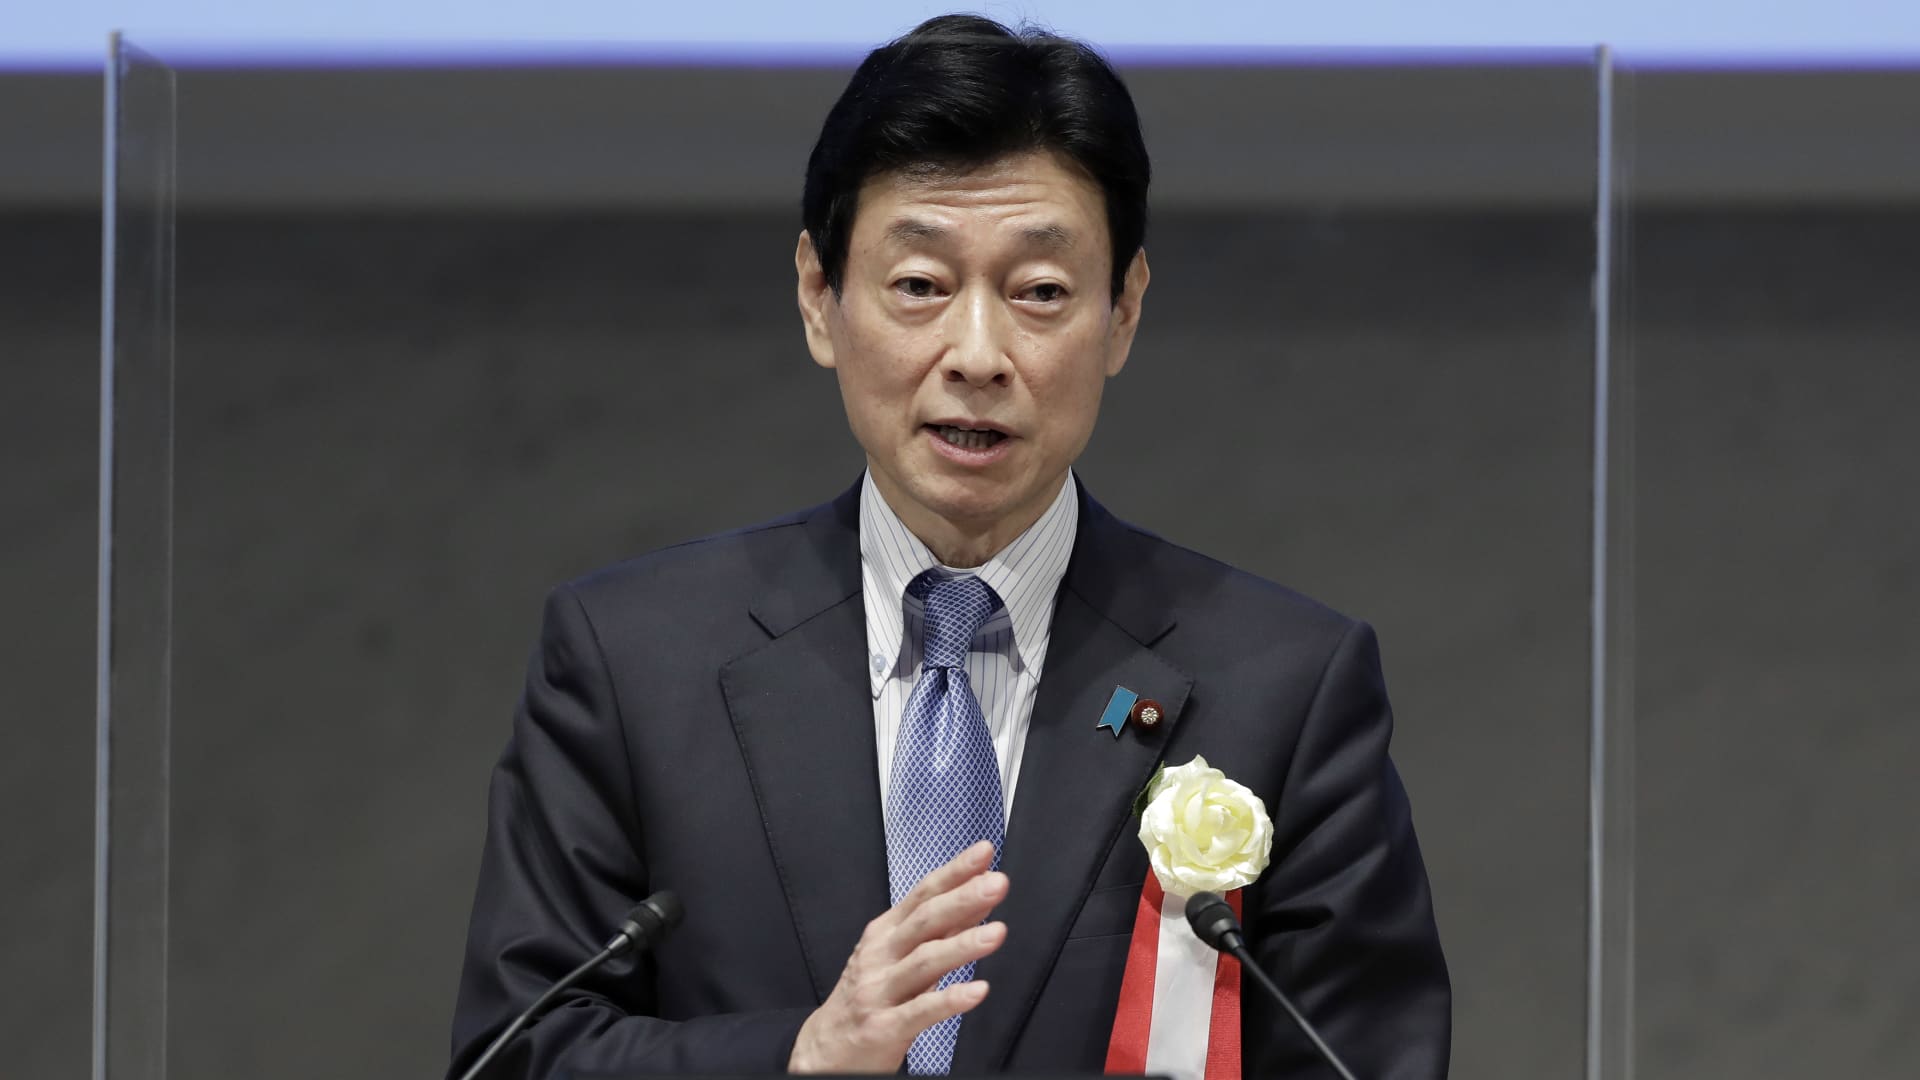 Nuclear power is key for Japan's energy security and carbon neutrality goals, minister says